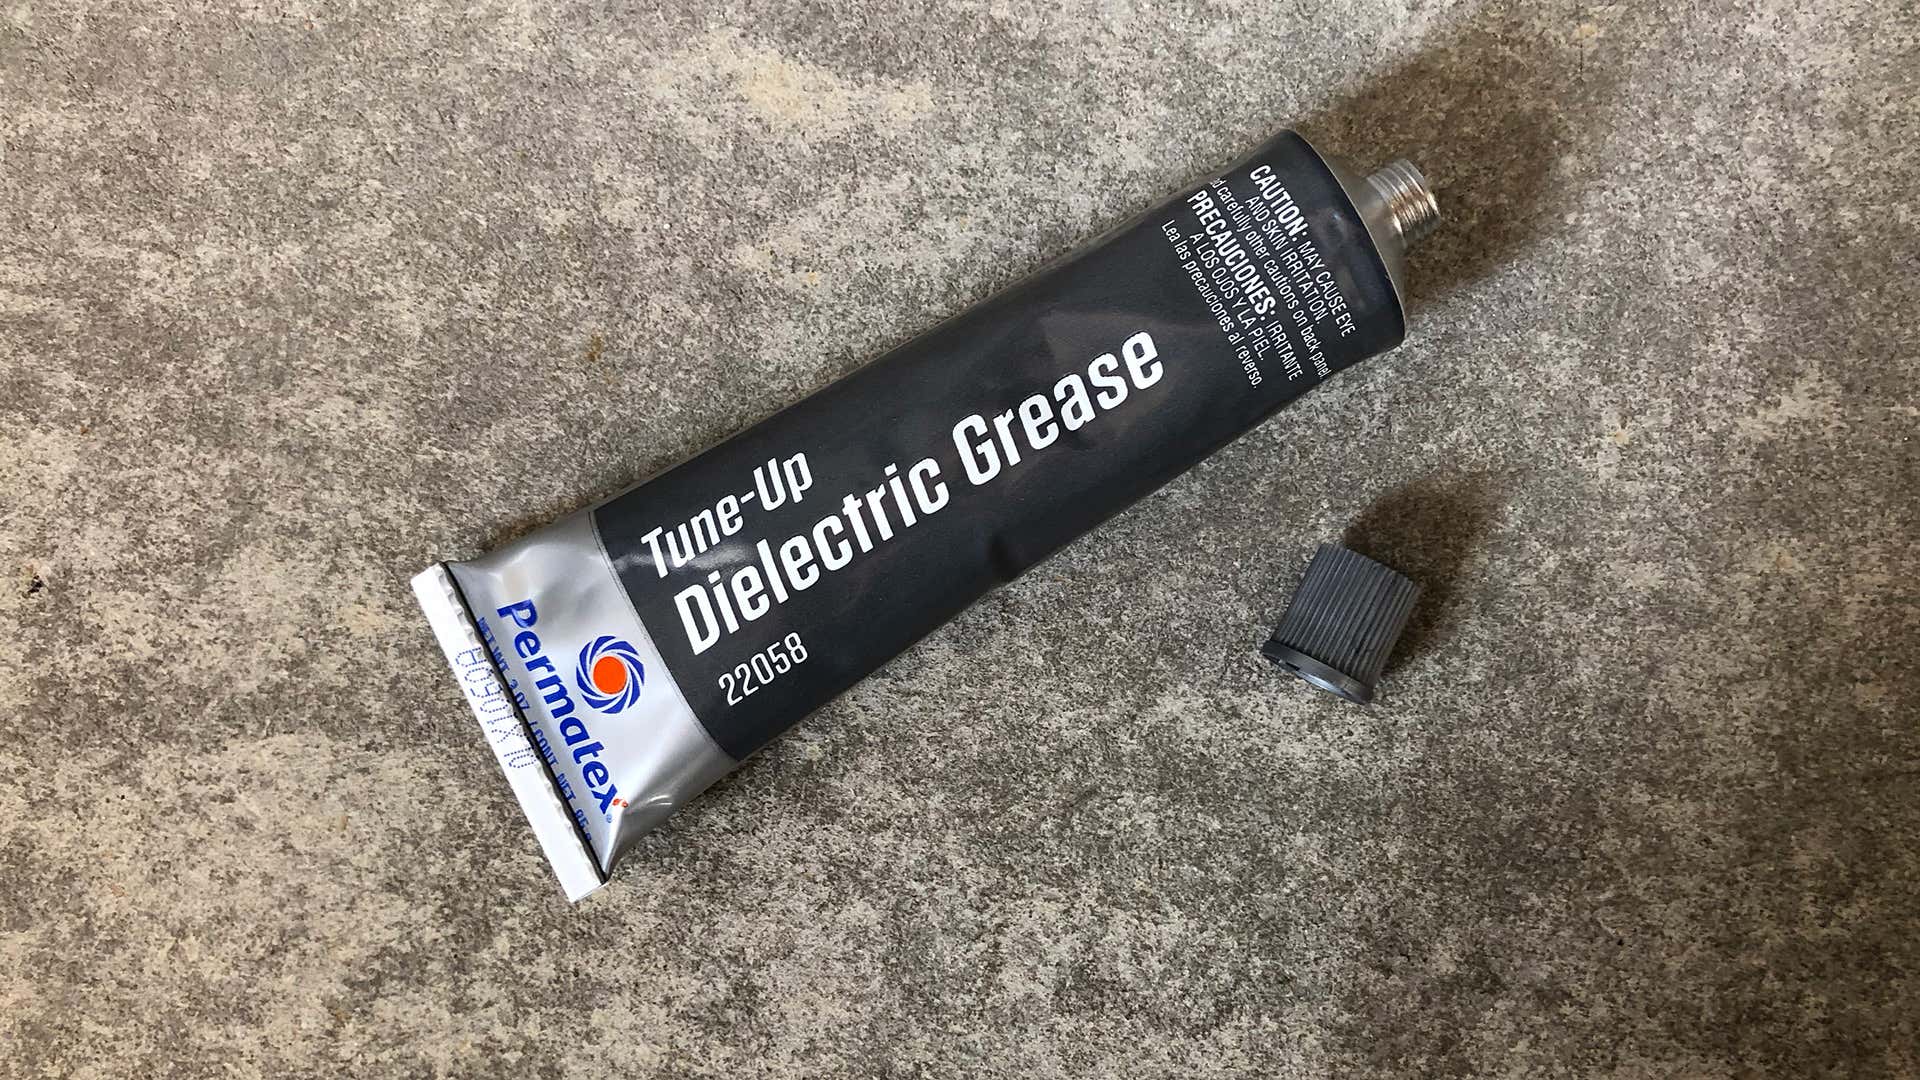 Tune-up dielectric grease on the floor.